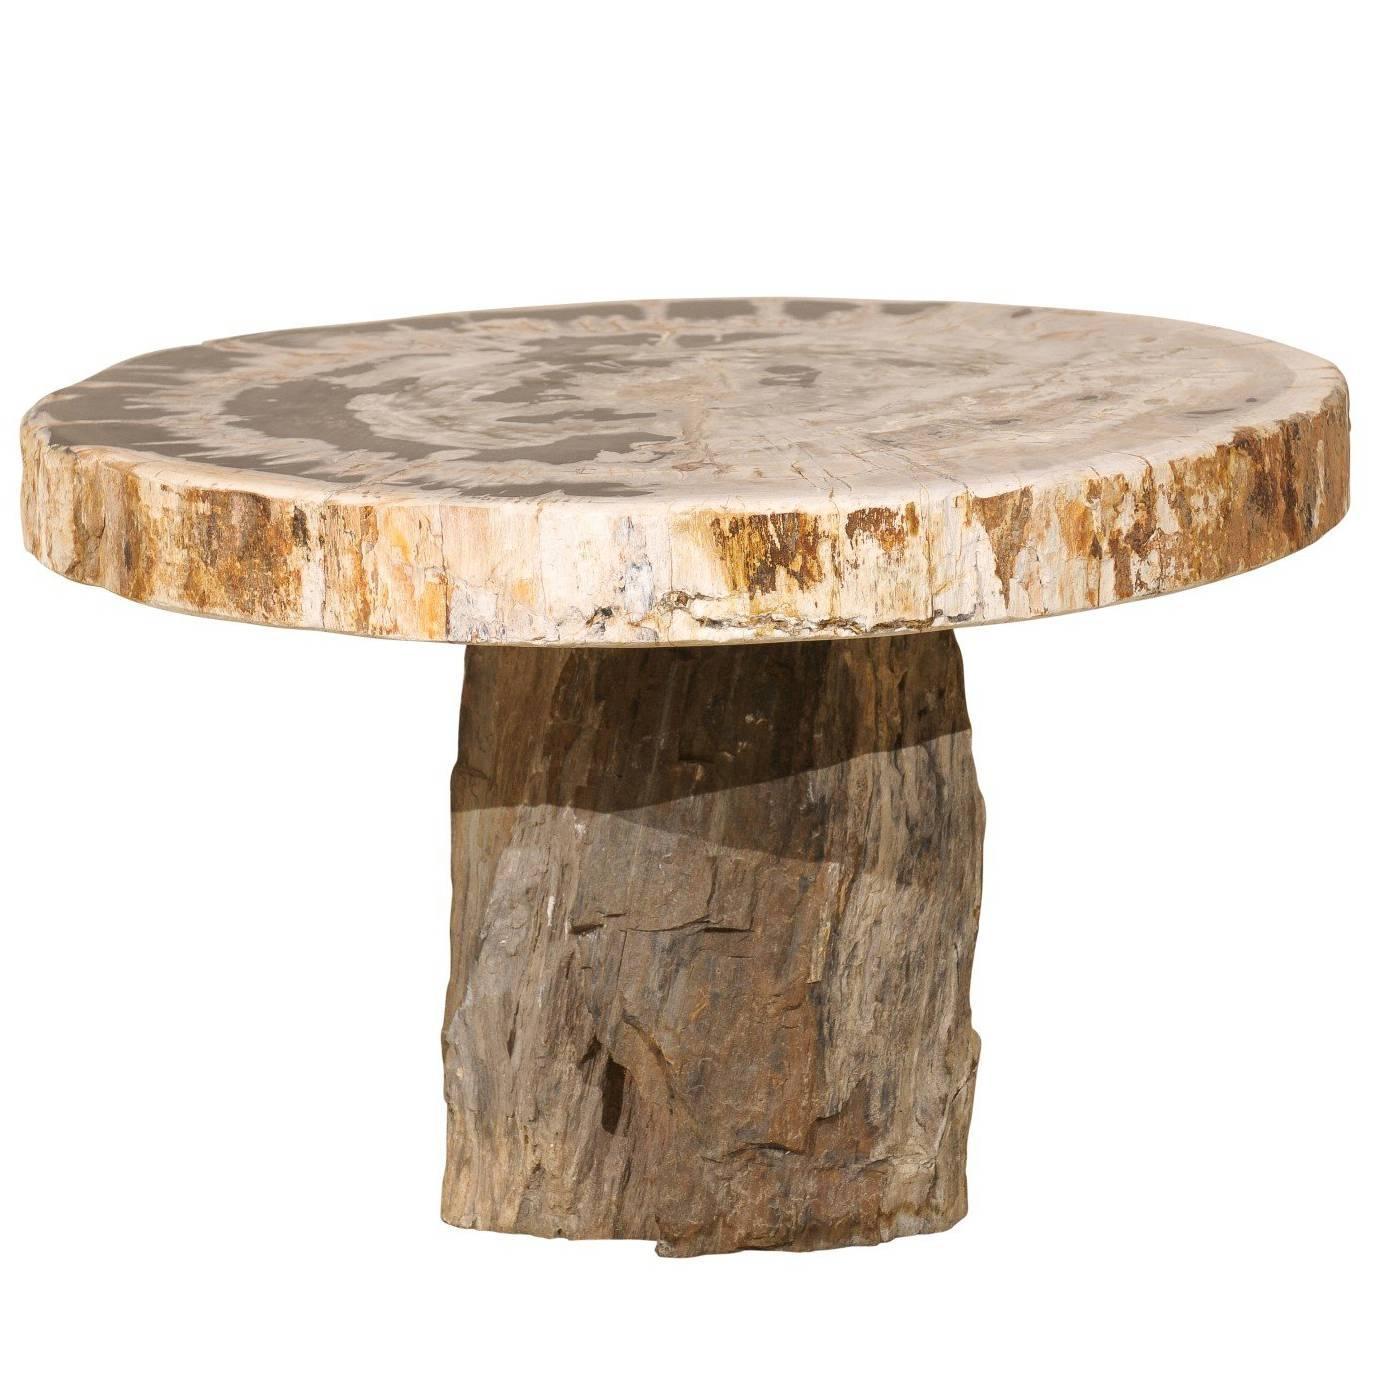 A Live-Edge Petrified Wood Pedestal Coffee Table w/Mostly Round-Shaped Top For Sale